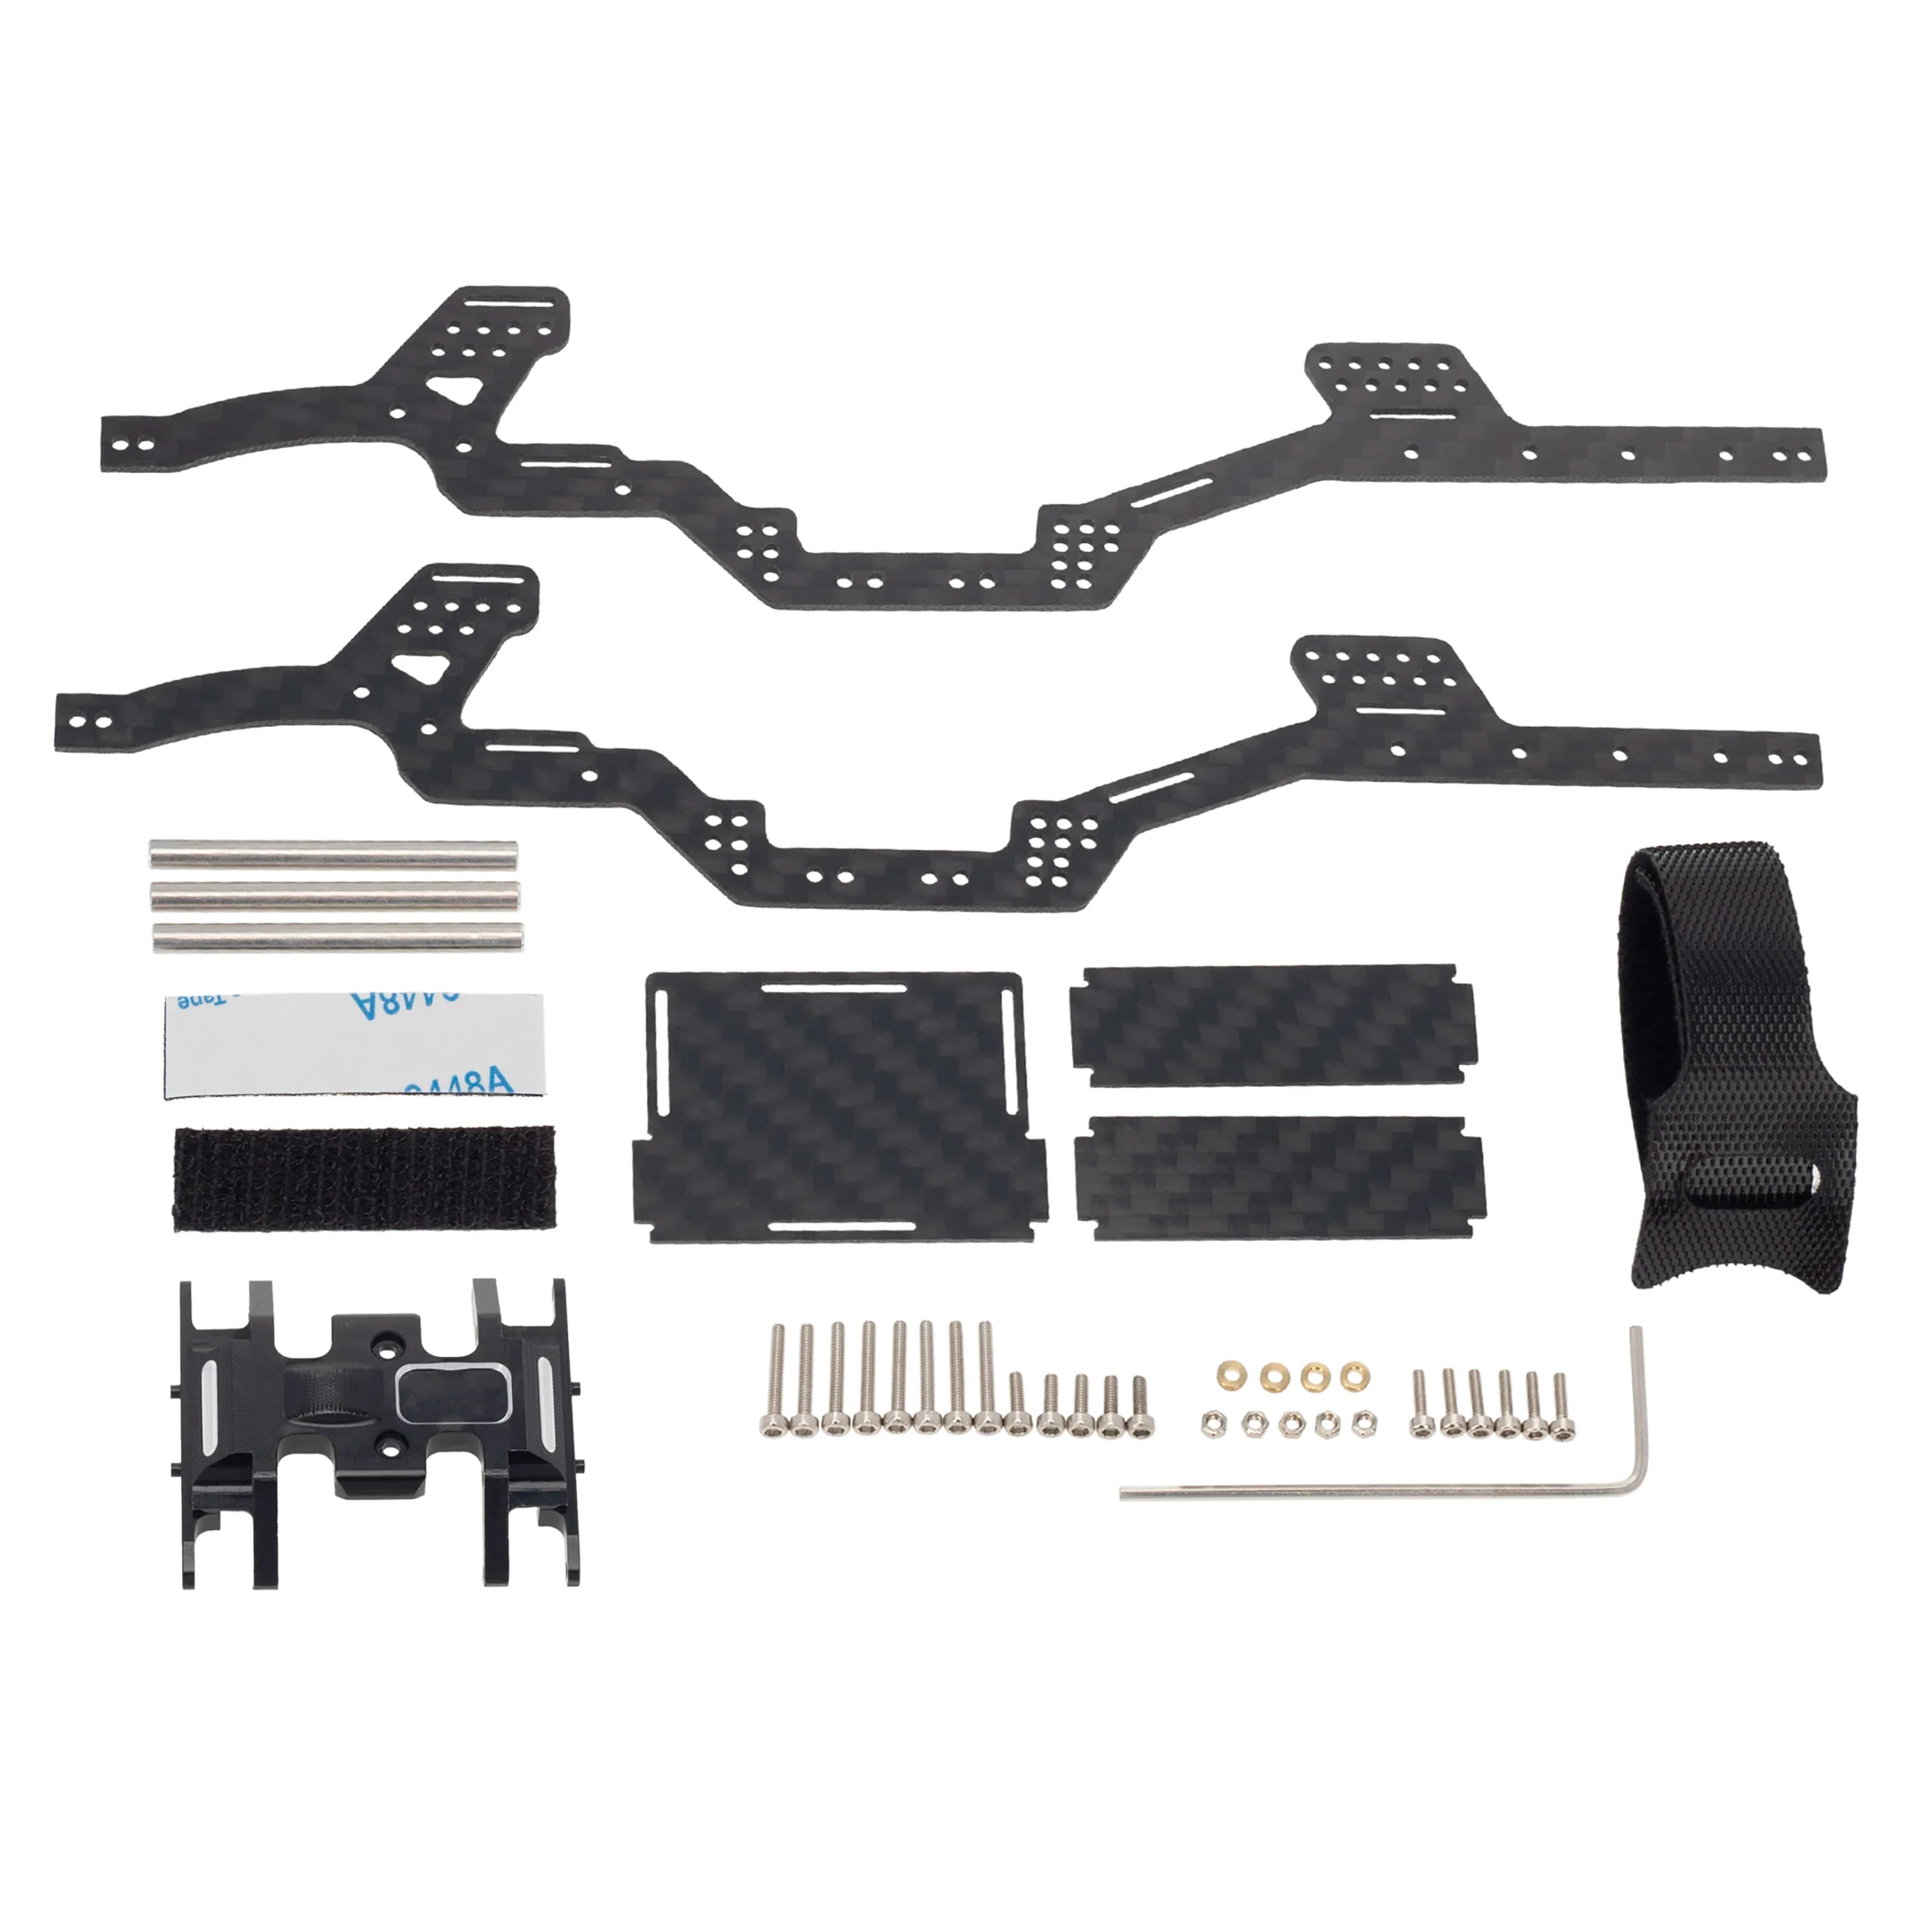 MEUS Racing LCG Carbon Fiber Chassis Kit Frame Girder, Low Center of Gravity Carbon Fiber Frame with Gearbox Mount Transmission Skid Plate Part for Axial SCX24 Deadbolt JLU C10 90081 - HeliDirect